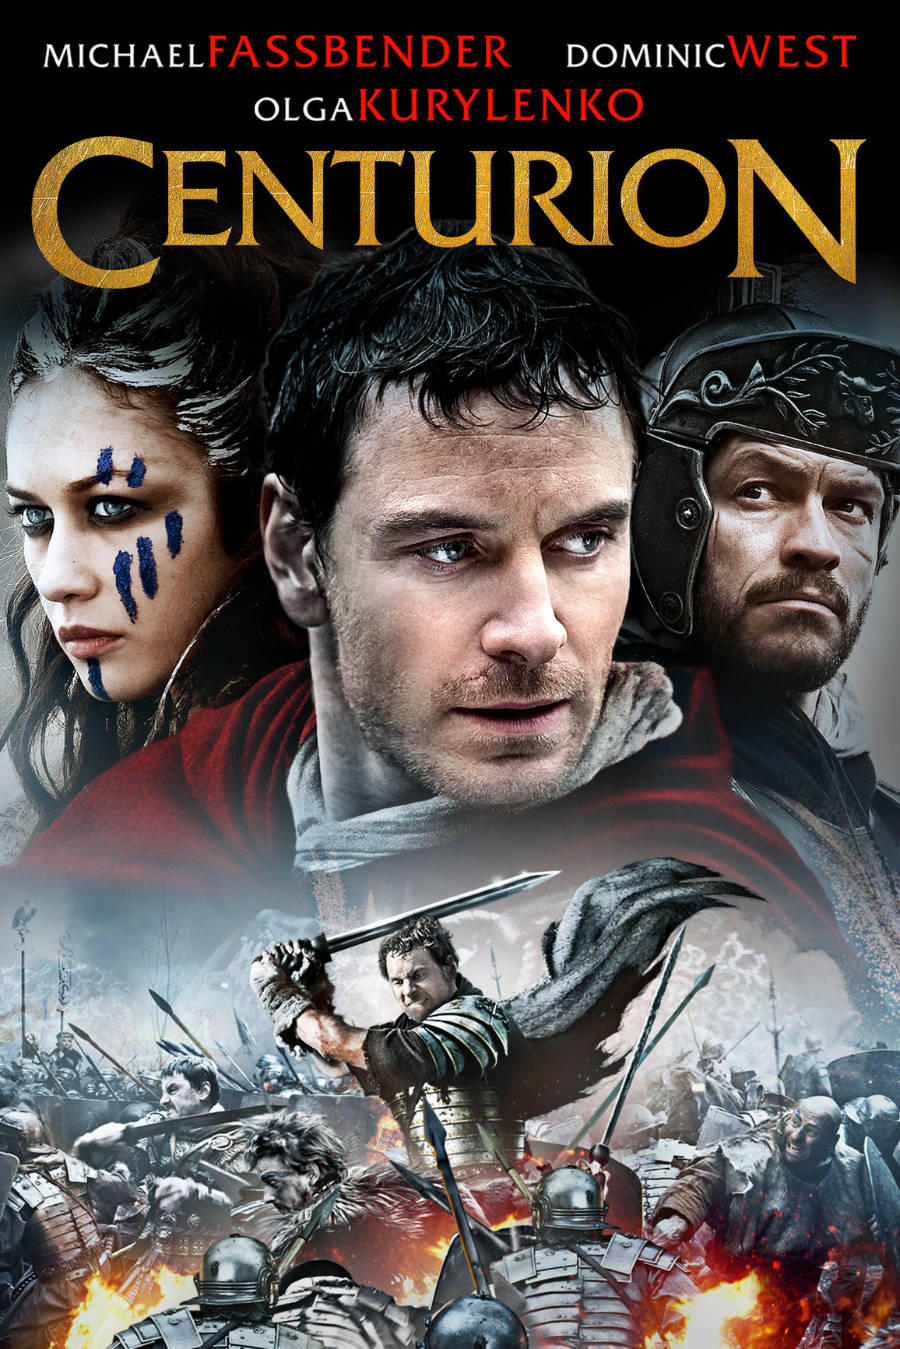 You are currently viewing Notes On A Film: Centurion